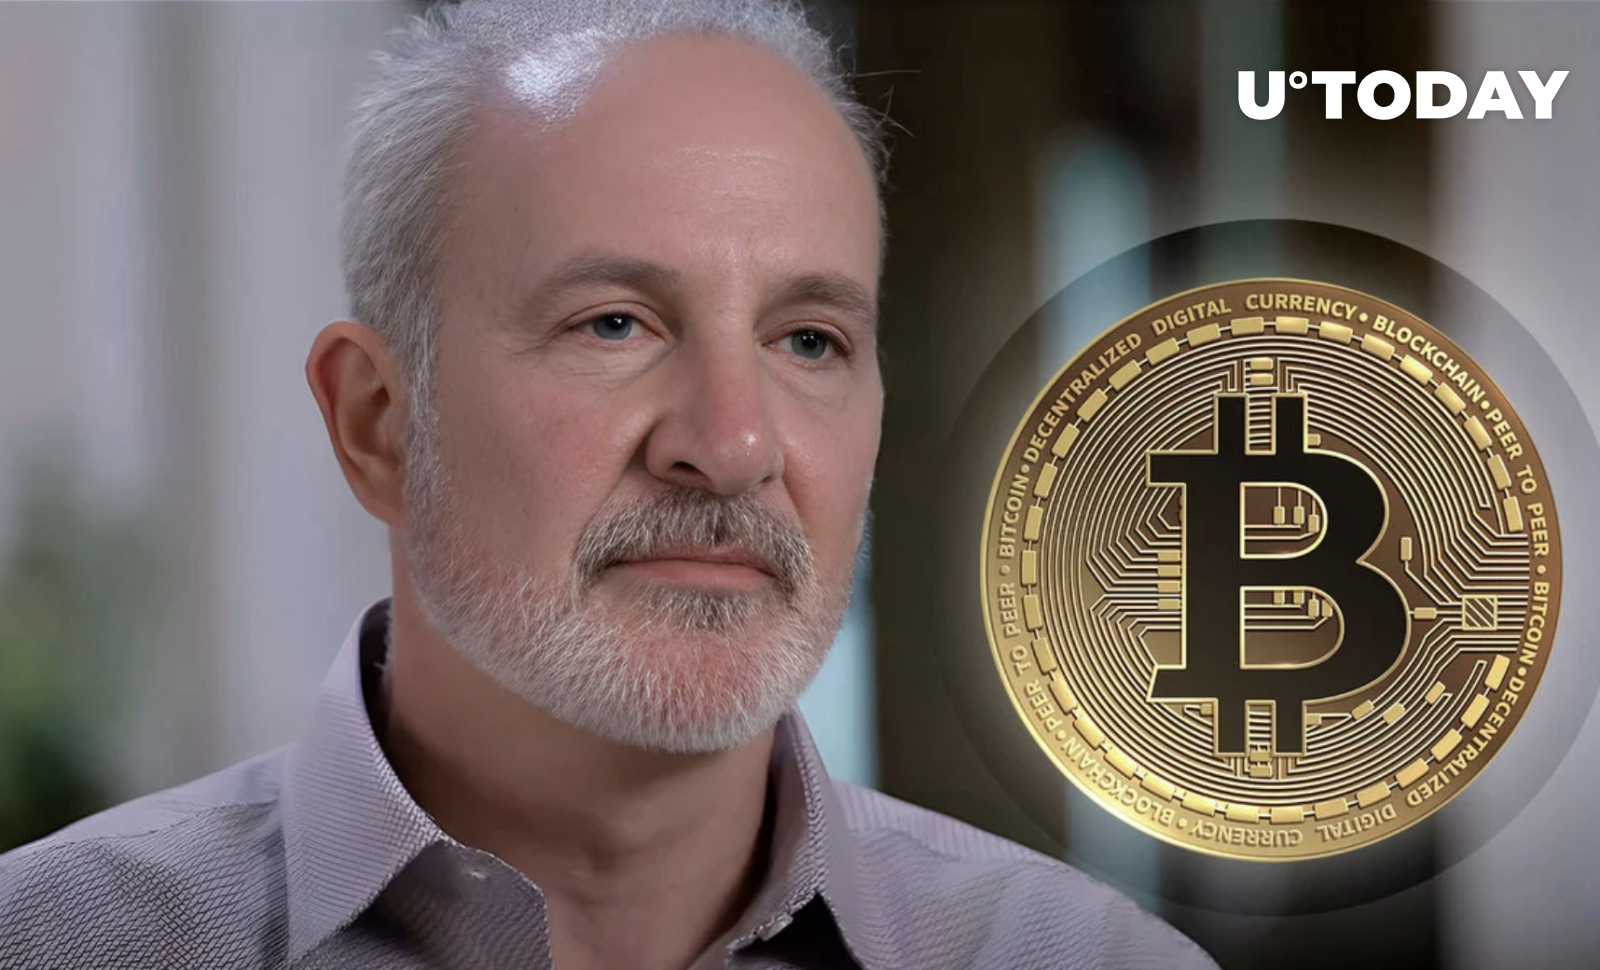 Peter Schiff on Silver: “It’s Bitcoin 2.0”